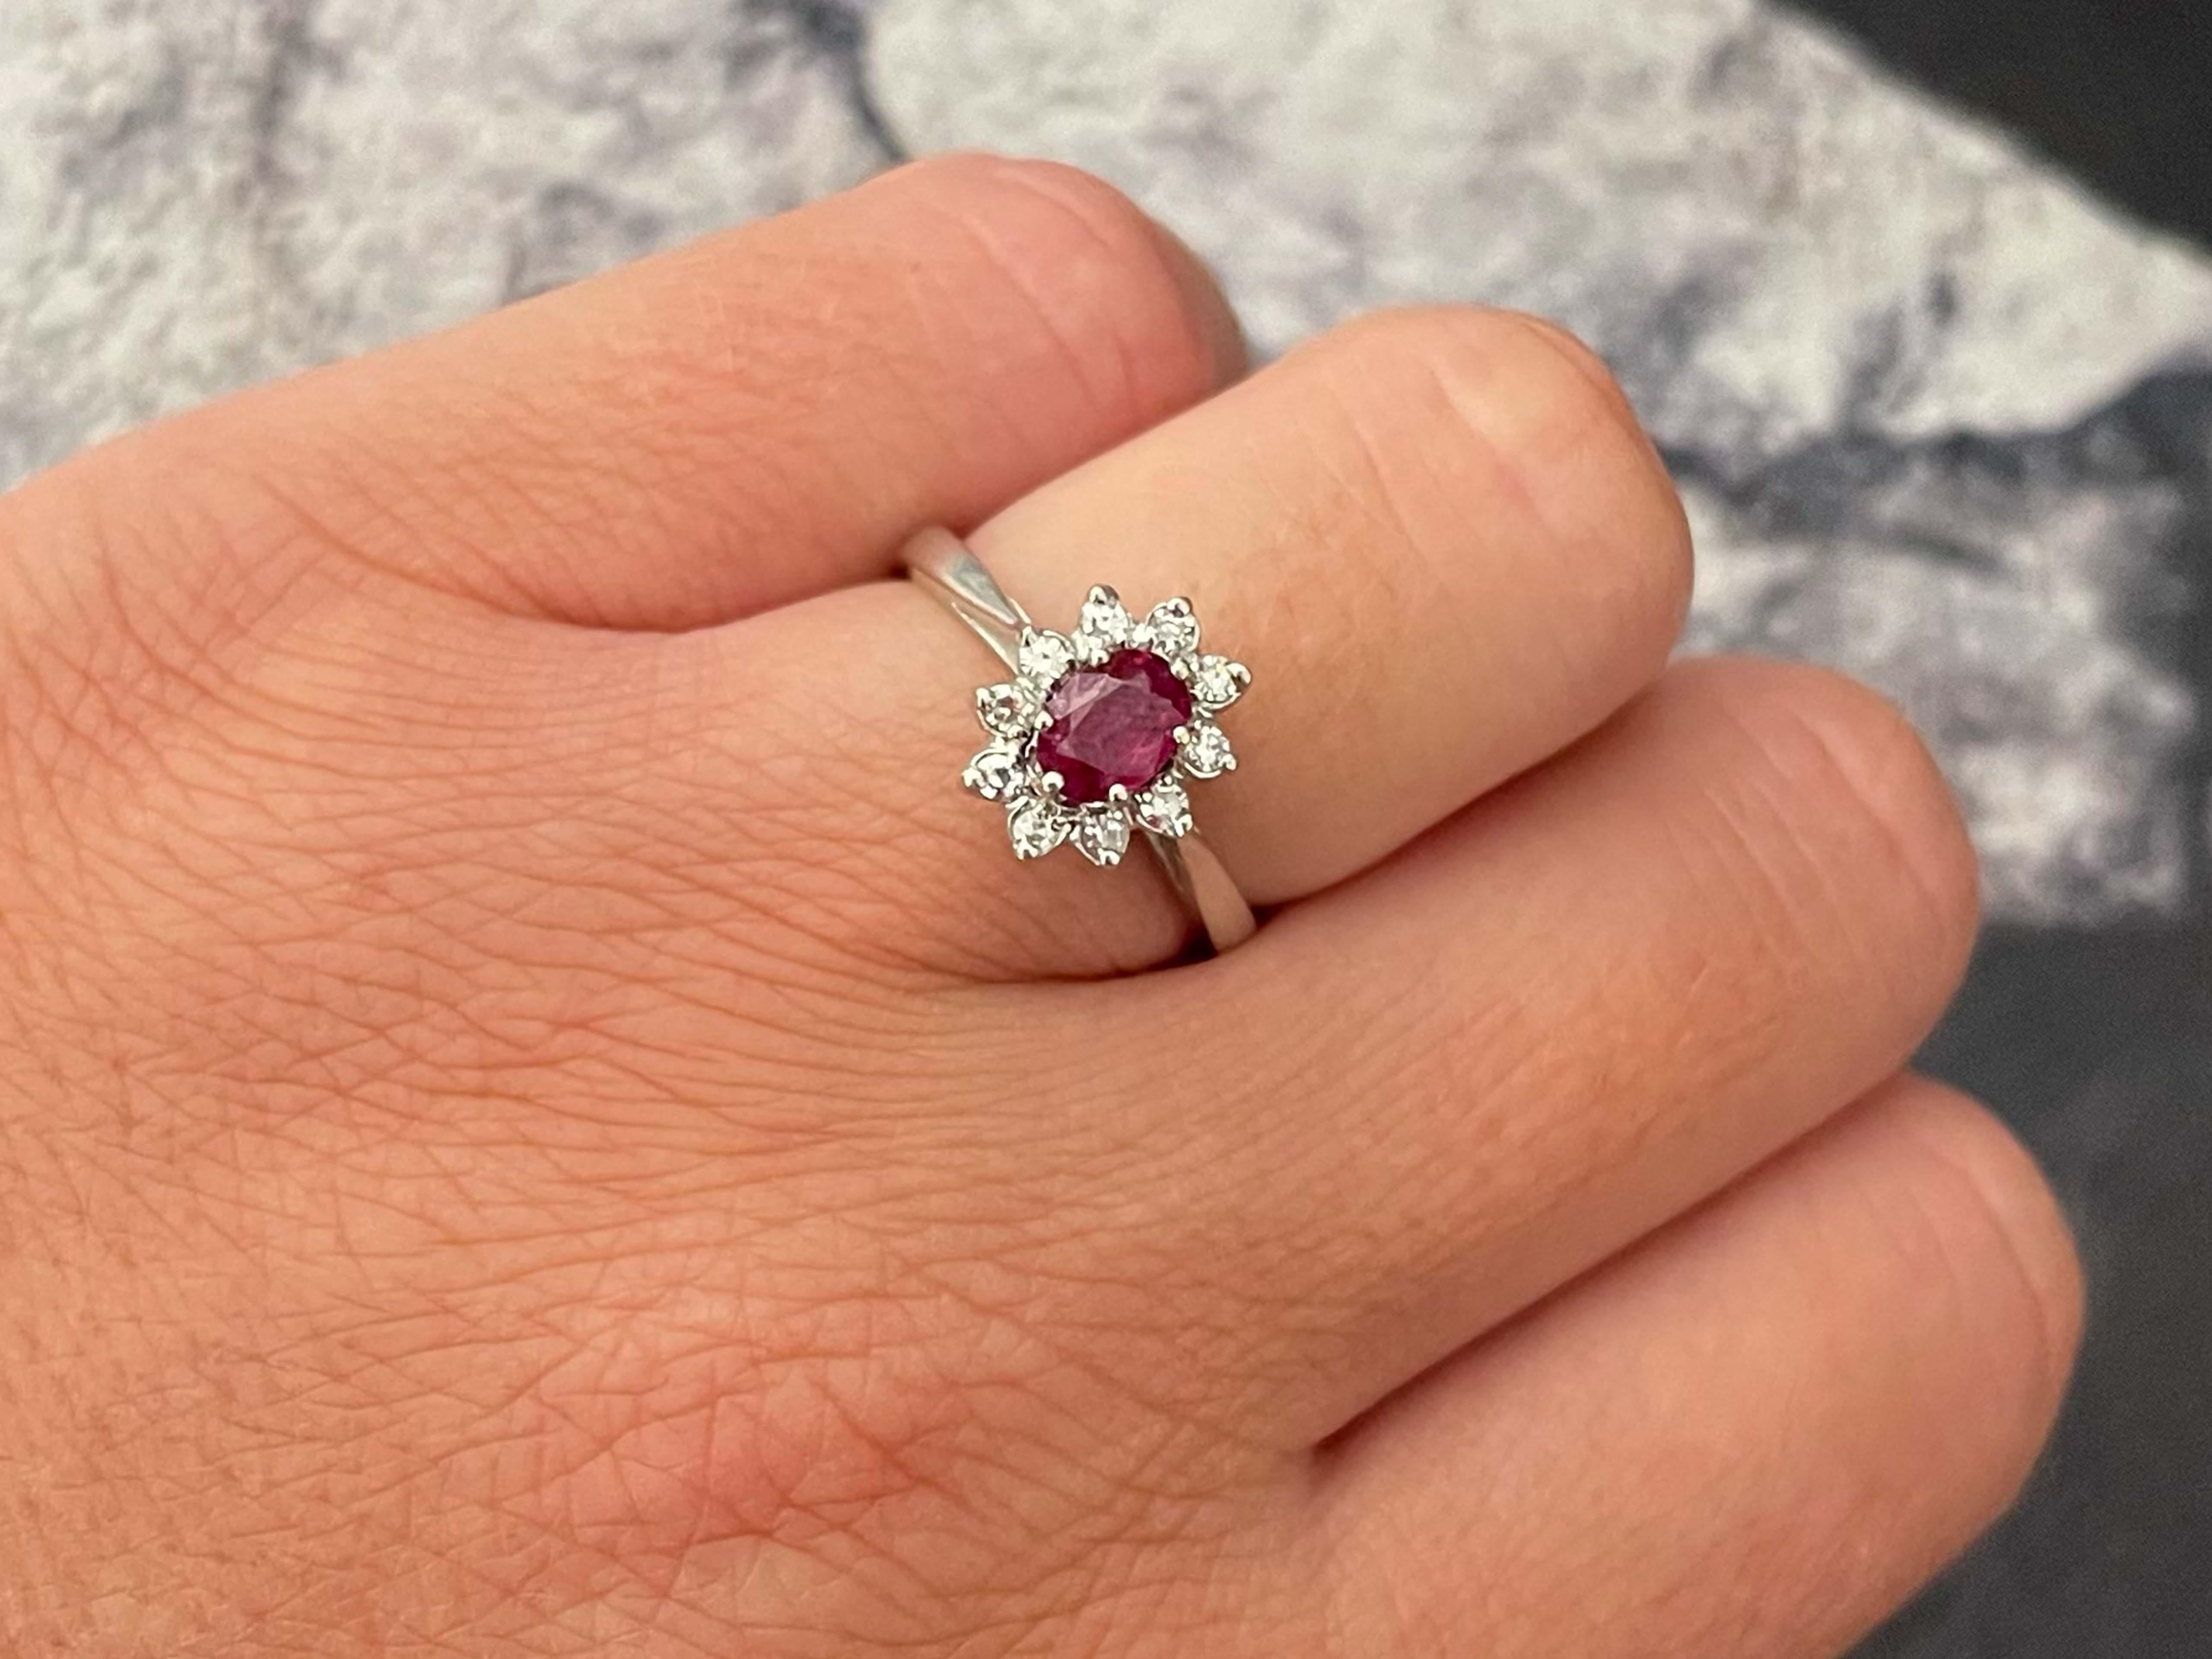 Item Specifications:

Metal: 14K White Gold

Style: Statement Ring

Ring Size: 6.5 (resizing available for a fee)

Total Weight: 3.5 Grams

Gemstone Specifications:

Gemstones: 1 red ruby

Ruby Carat Weight: 0.48 carats

Diamond Carat Weight: 0.05